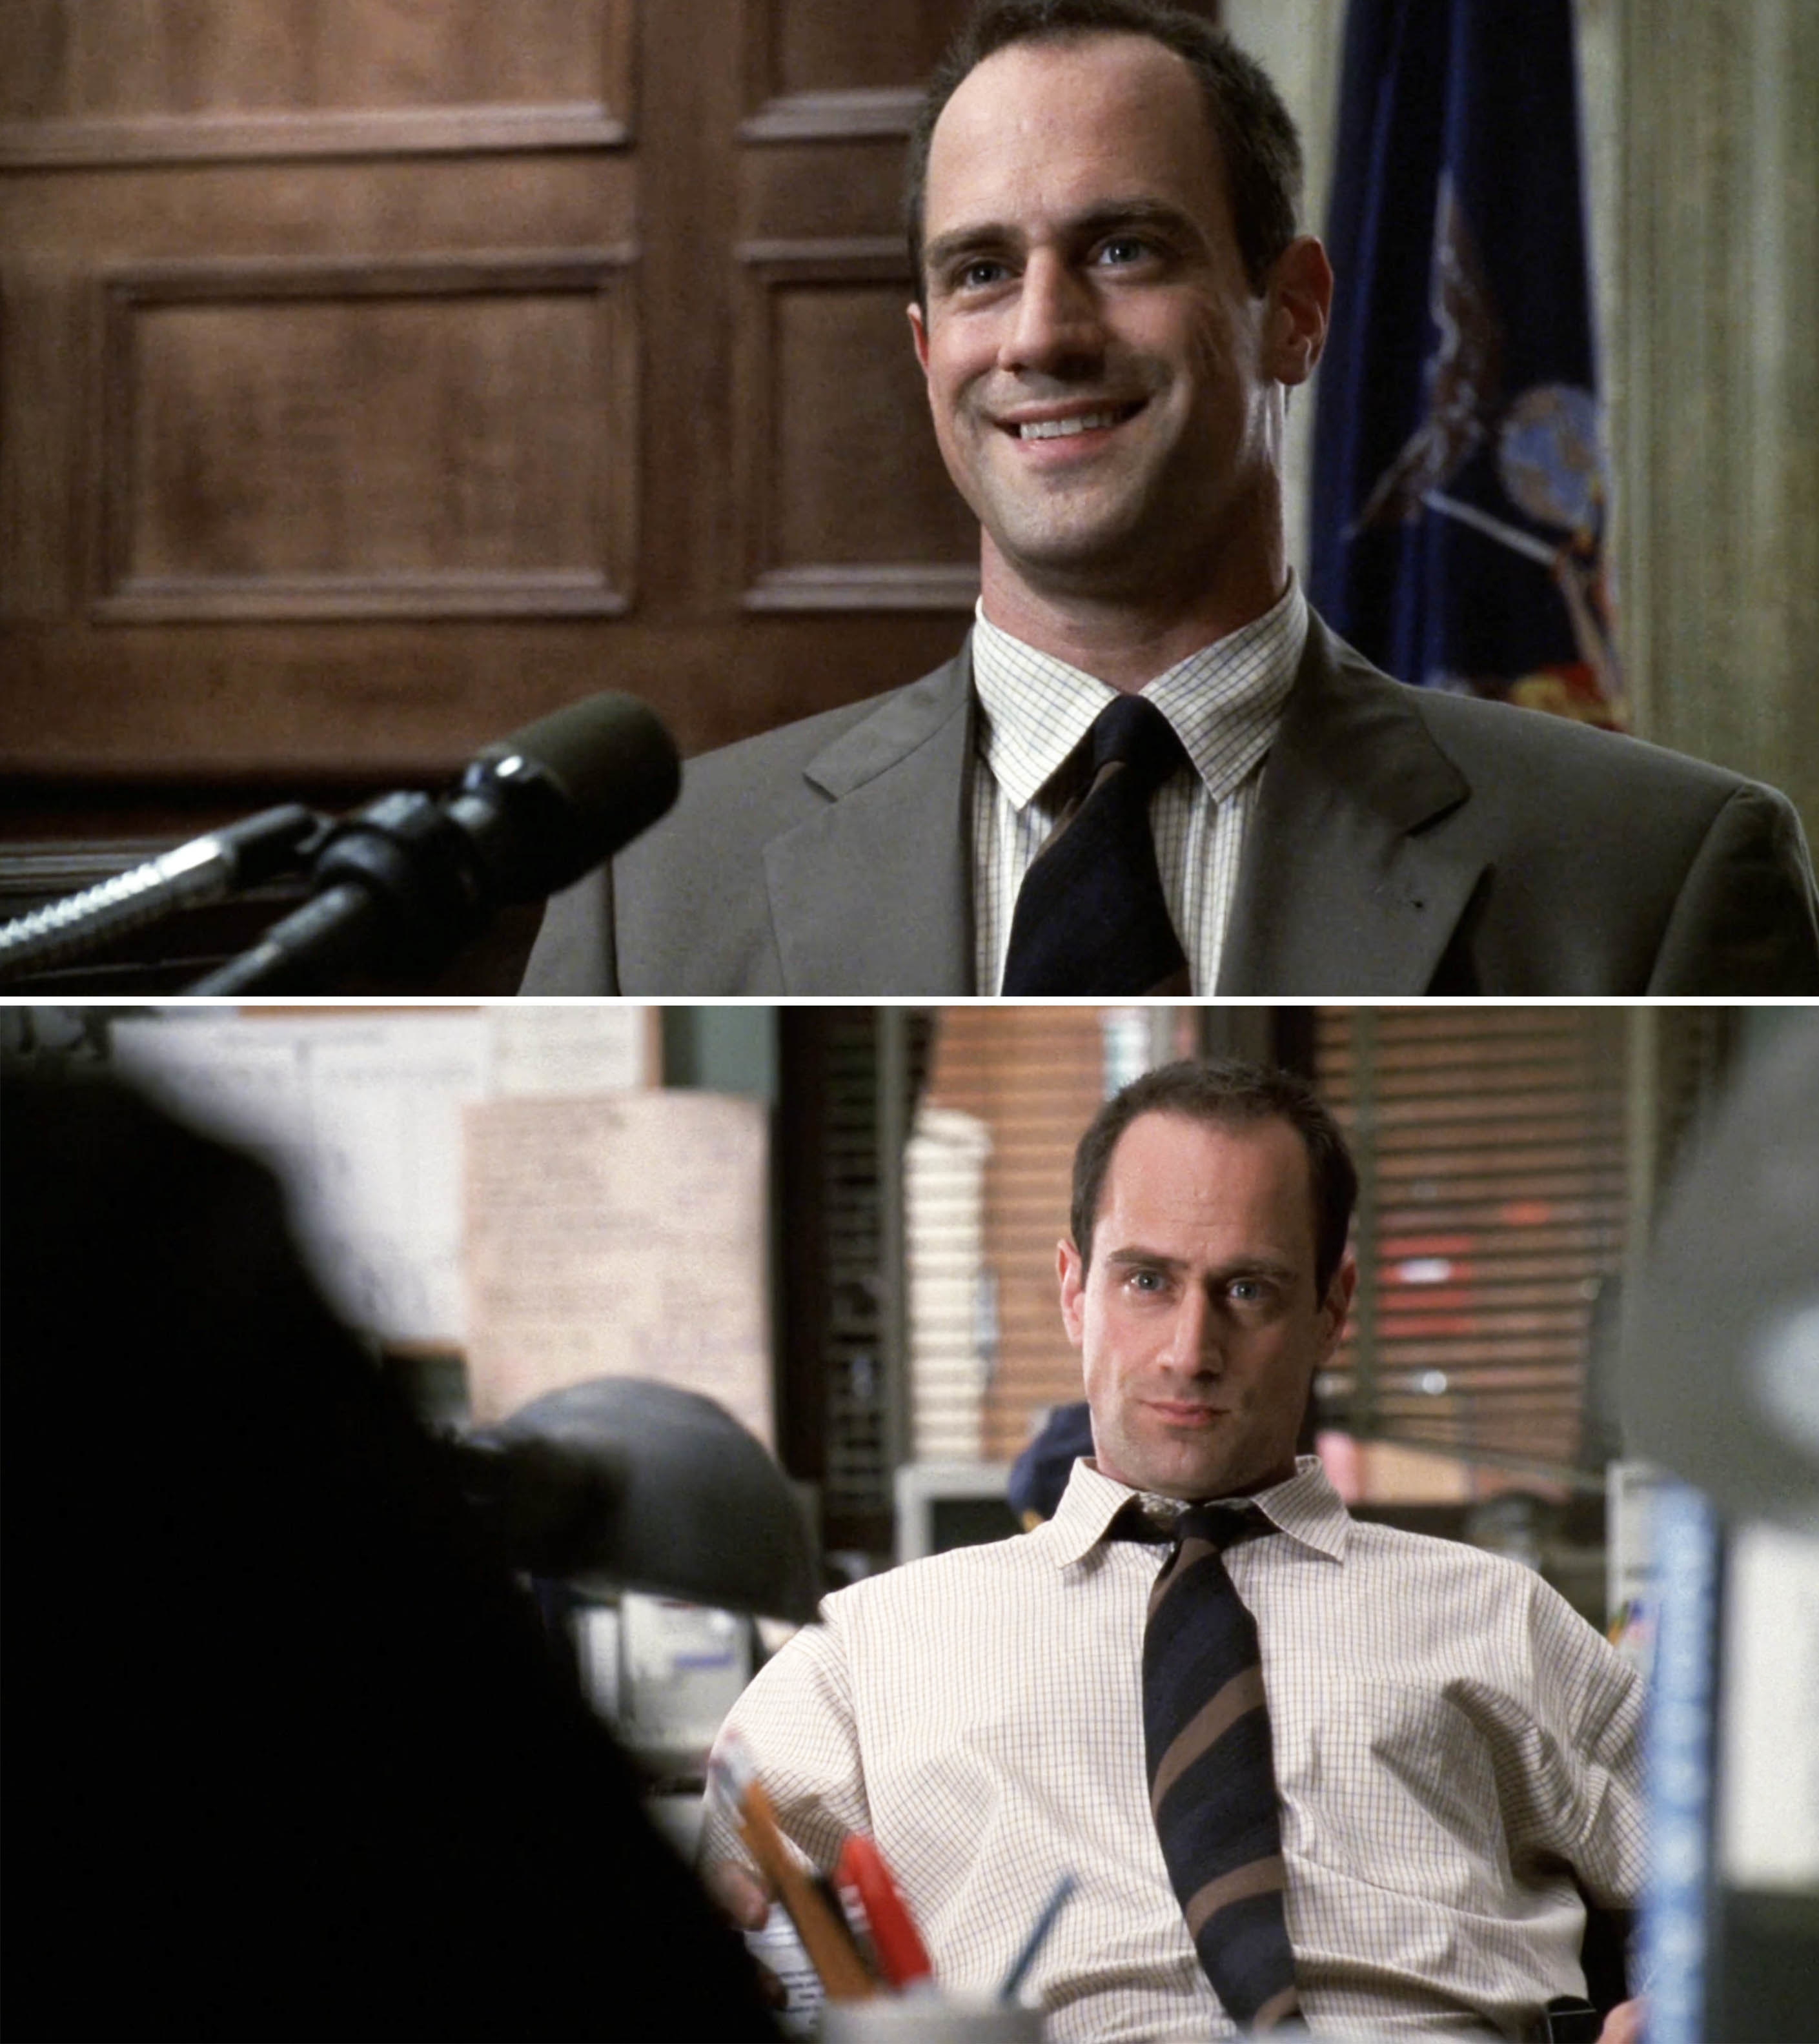 Elliot Stabler on the stand; Elliot in his office